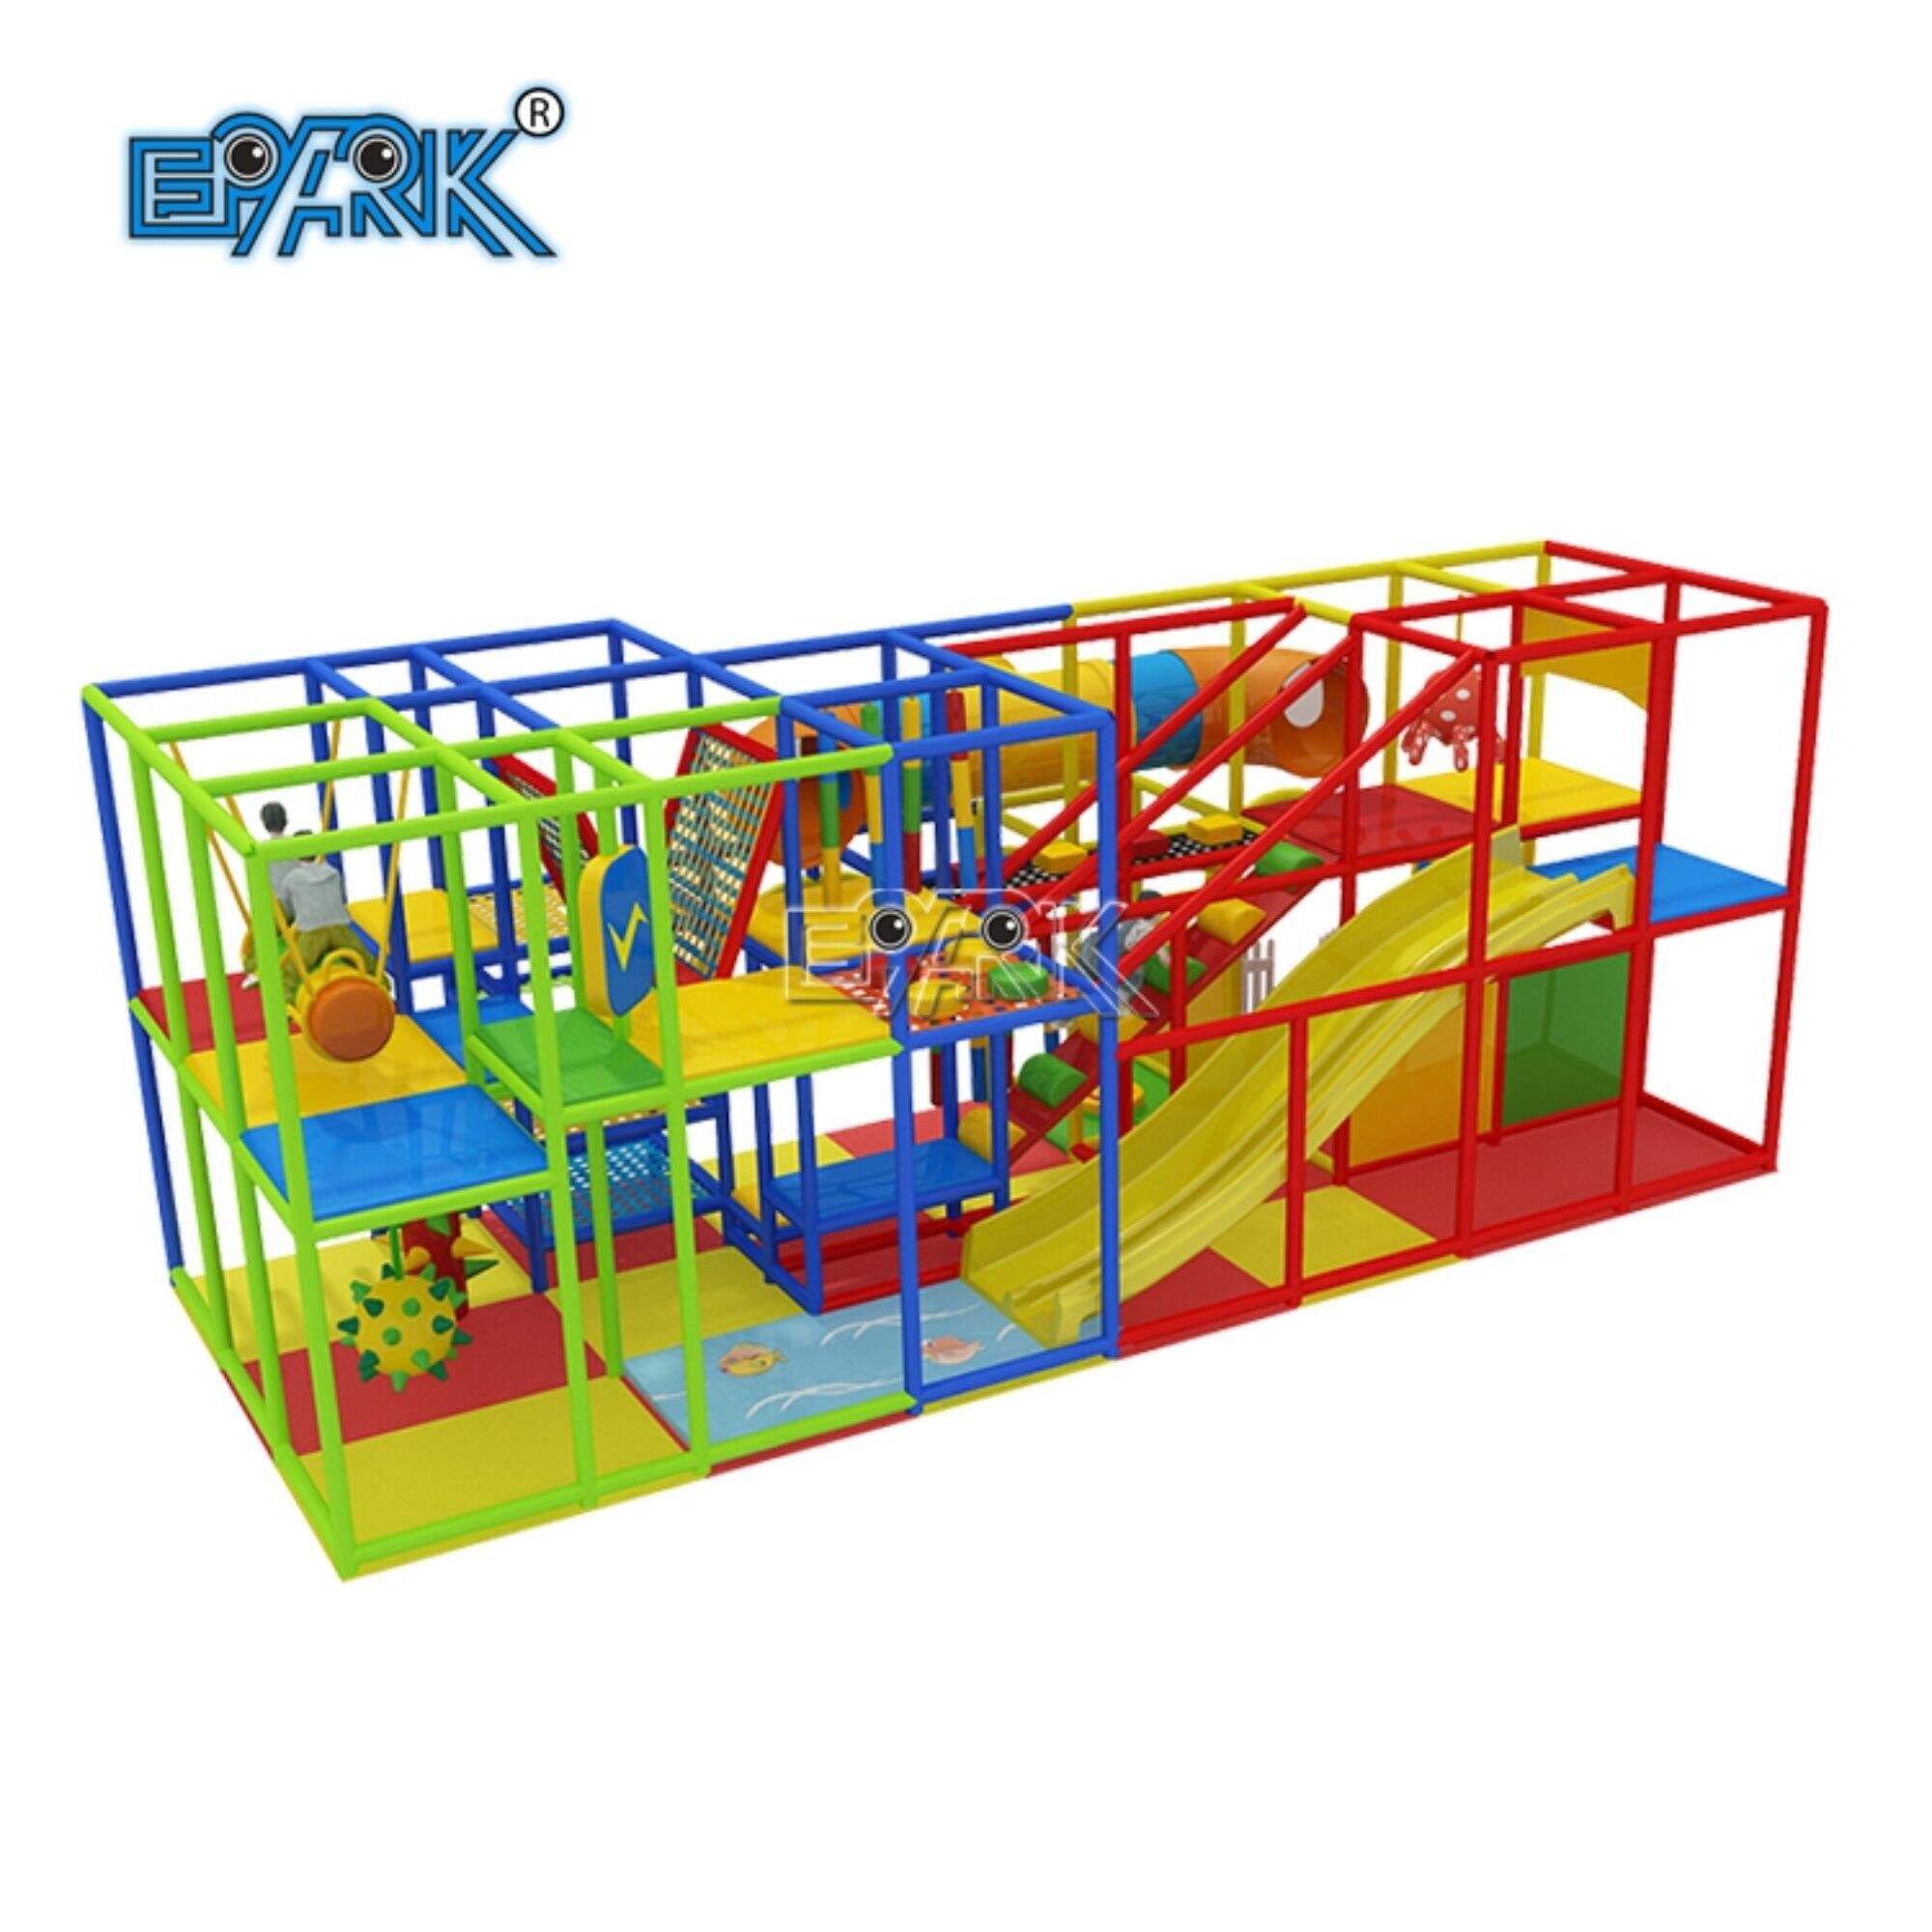 Wholesale Fashionable Jungle Gym Children Commercial Big Business Indoor Playground Equipment For Sale Made In China